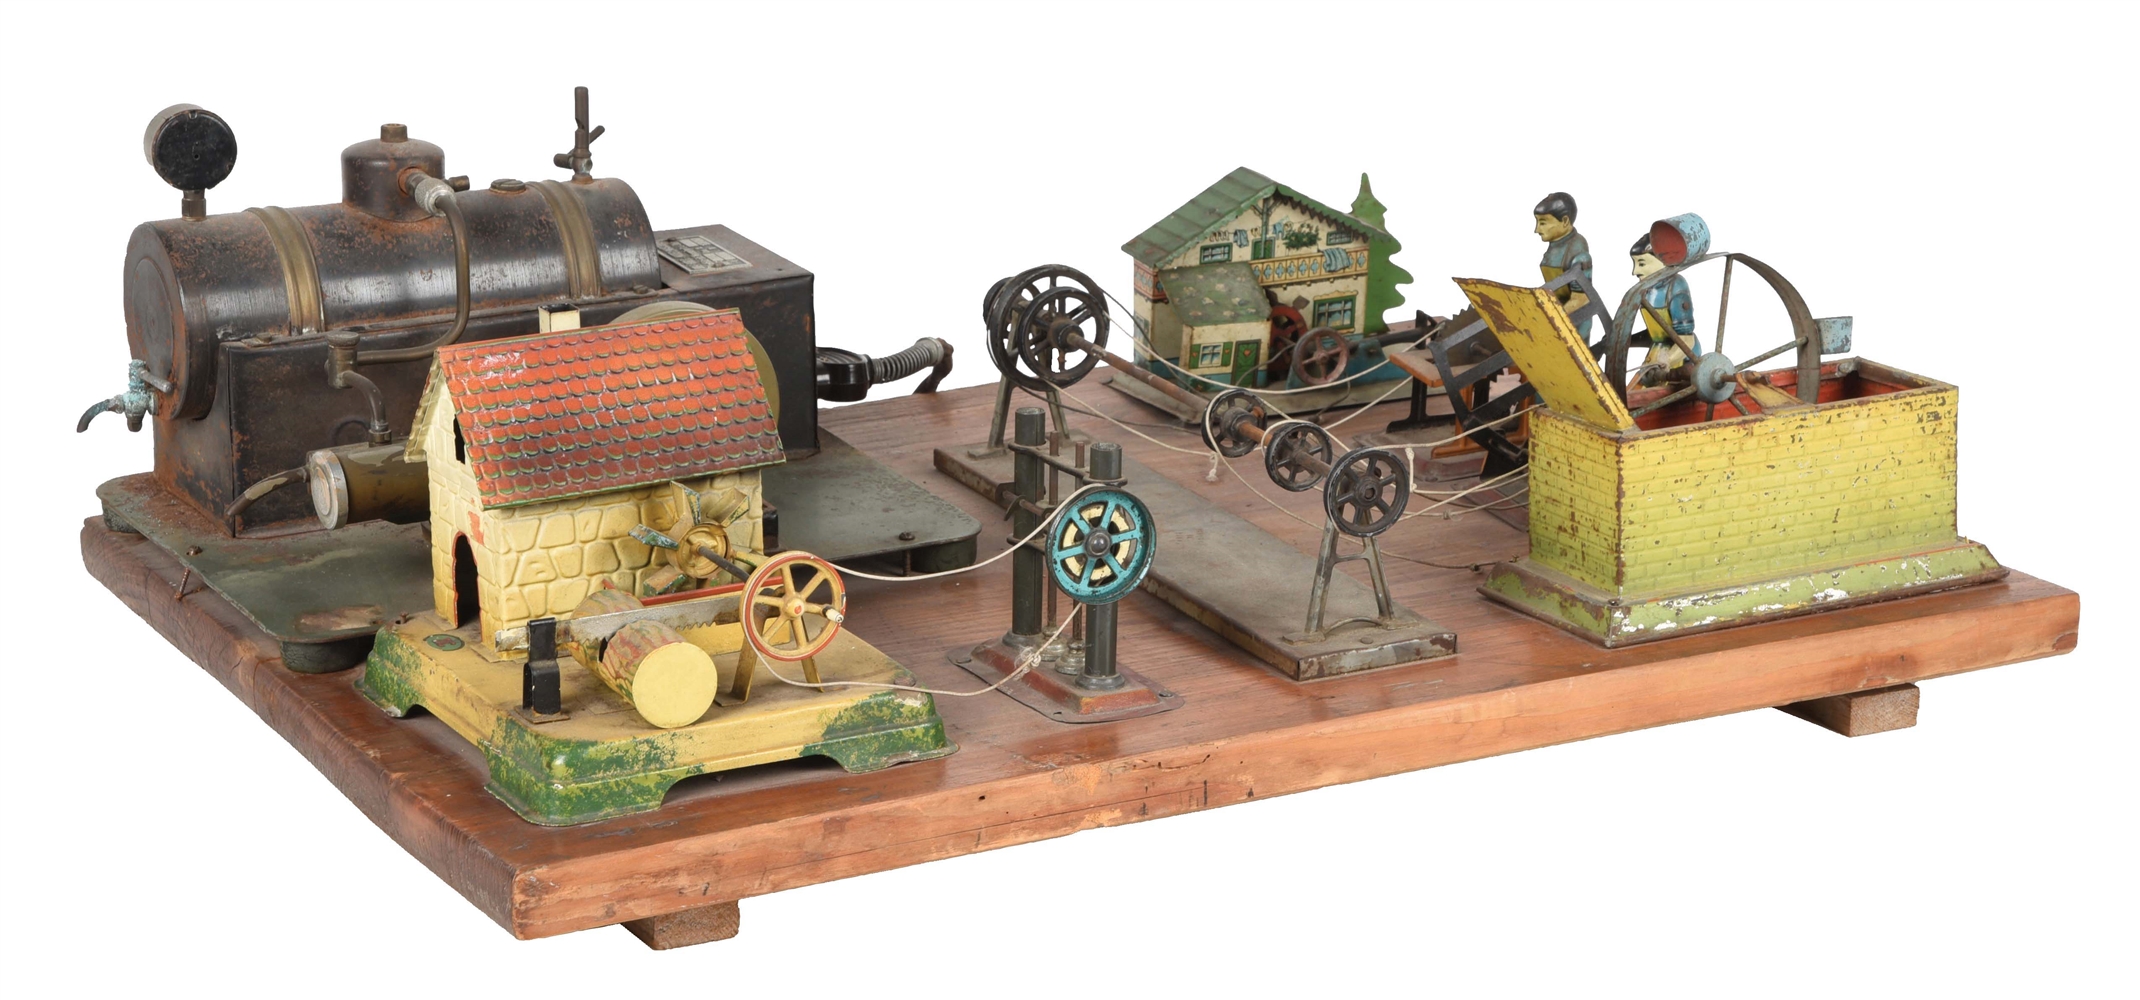 UNUSUAL GERMAN TIN LITHO ON WOODEN BOARD STEAM ENGINE & ACCESSORY SET.